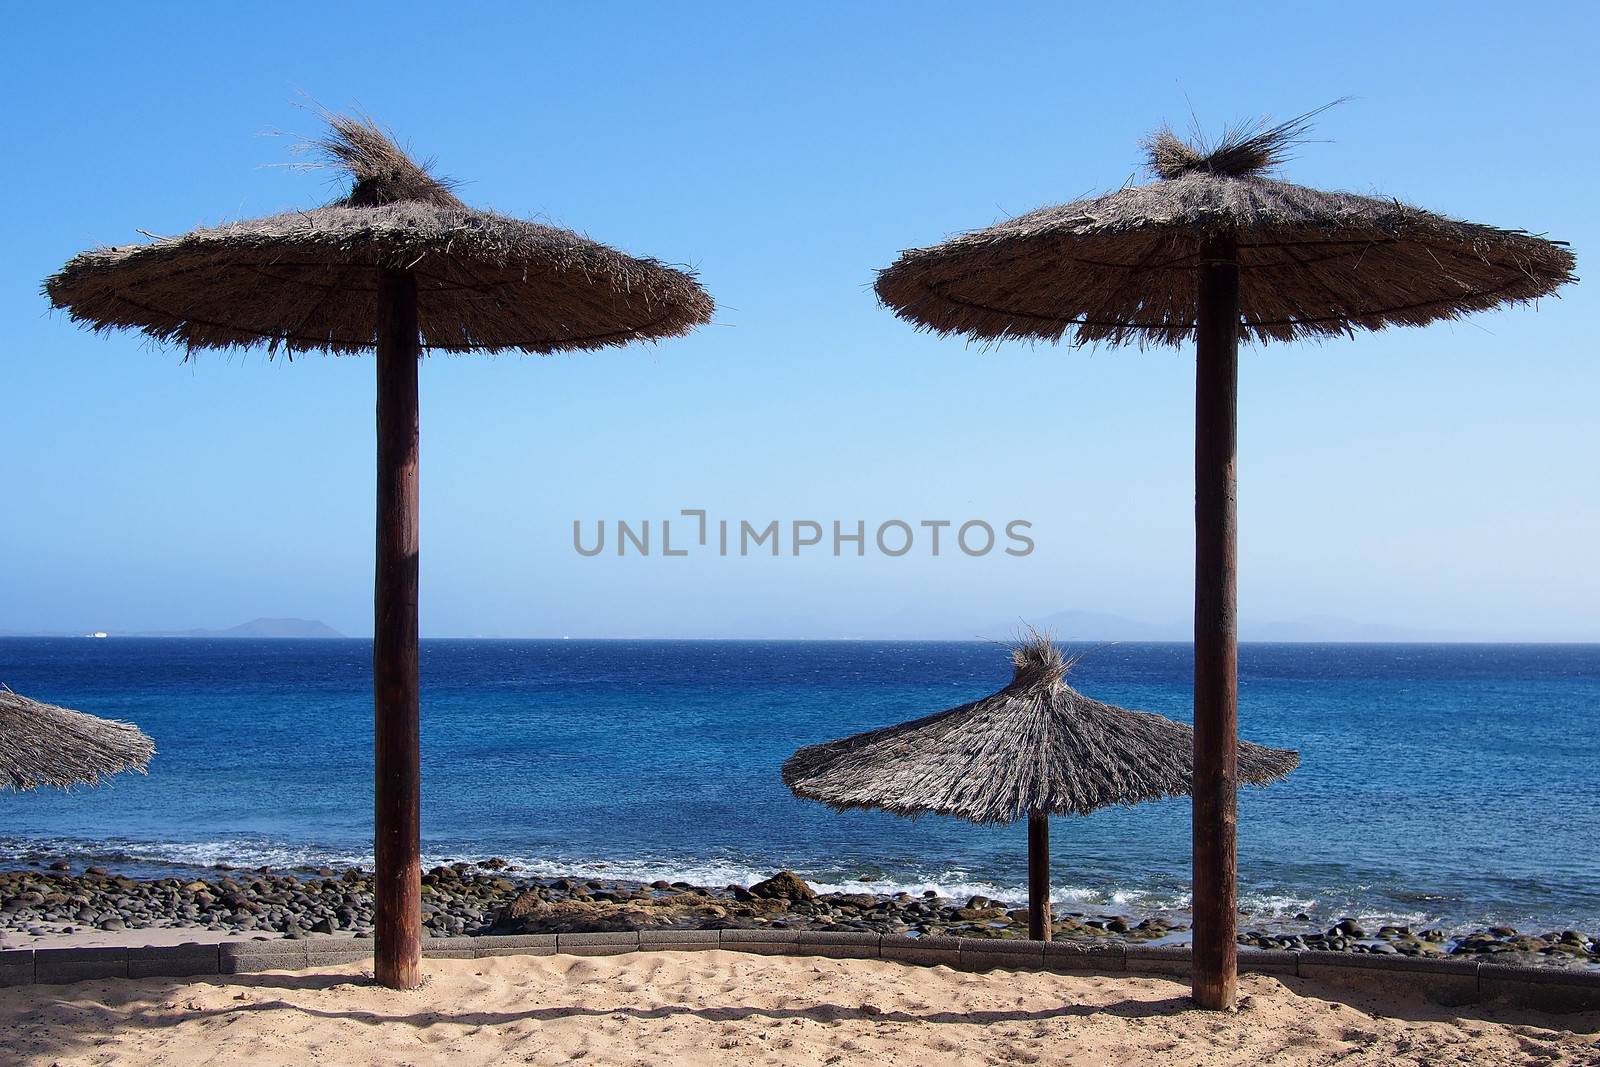 Thatched-roof umbrellas at the beach